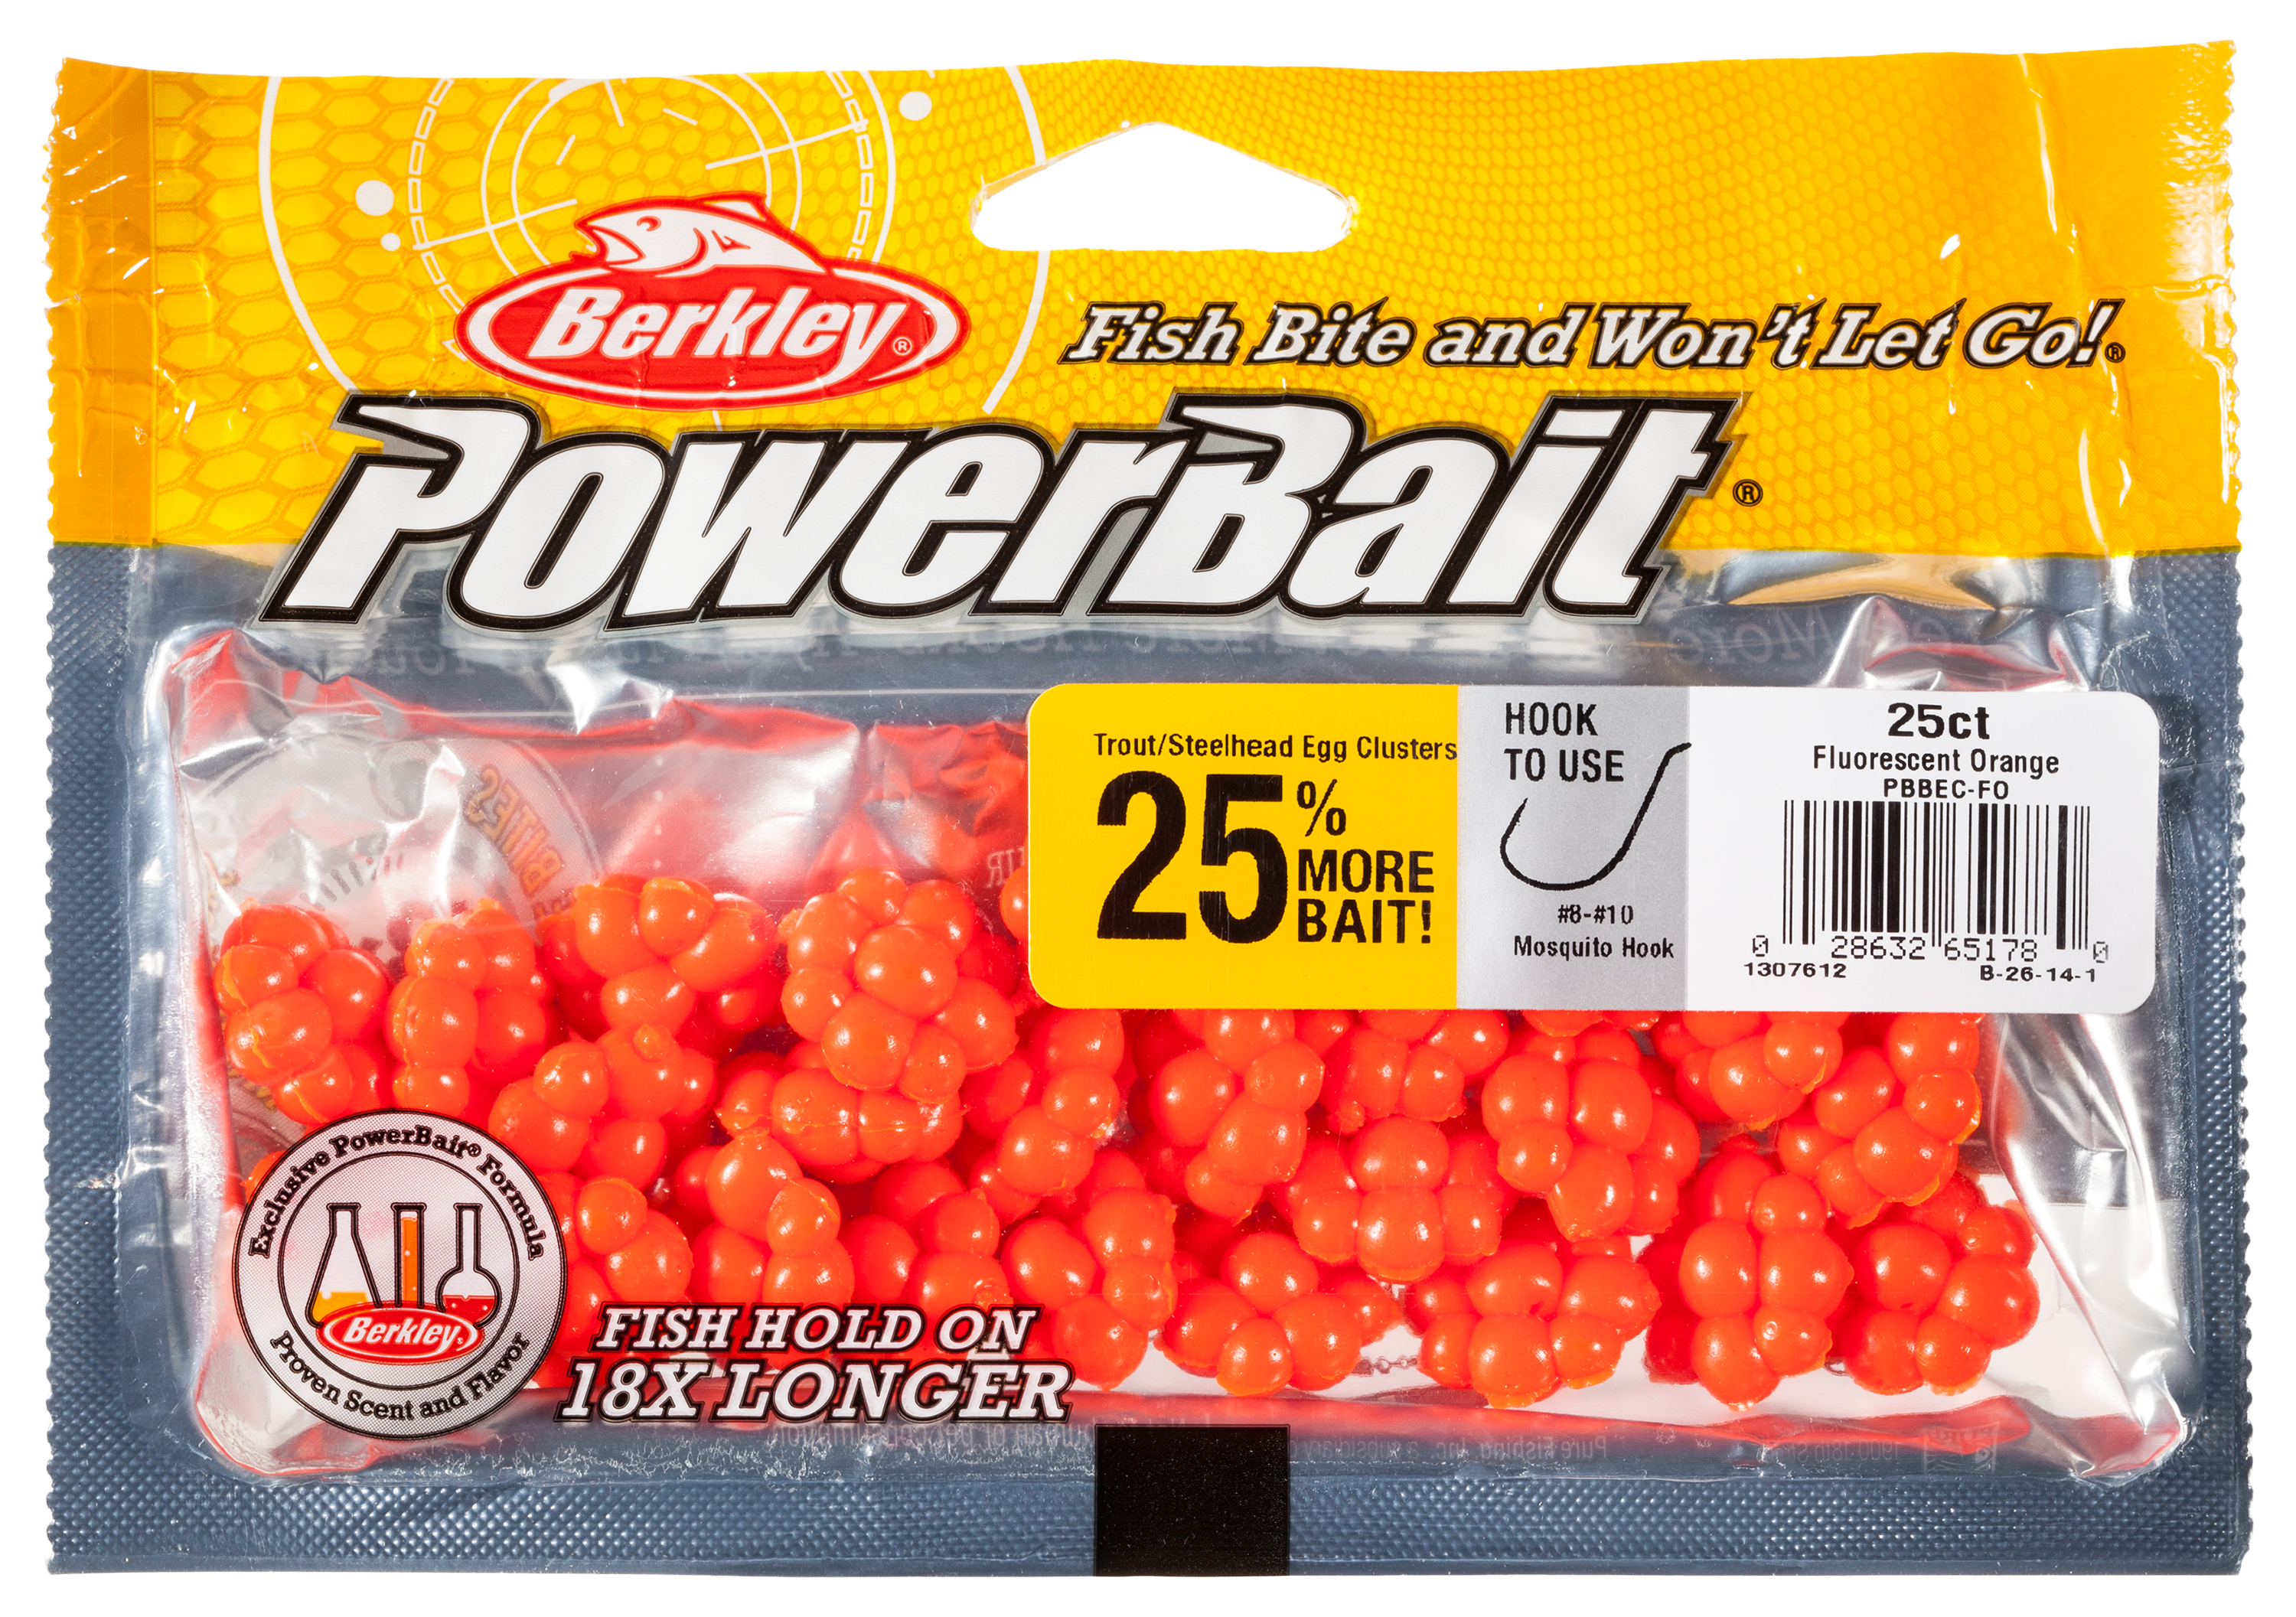  Berkley PowerBait Trout/Steelhead Egg Clusters Fishing Bait,  Shrimp, Irresistible Scent & Flavor, Natural Presentation, Ideal for Trout,  Steelhead, Salmon and More : Artificial Fishing Bait : Sports & Outdoors